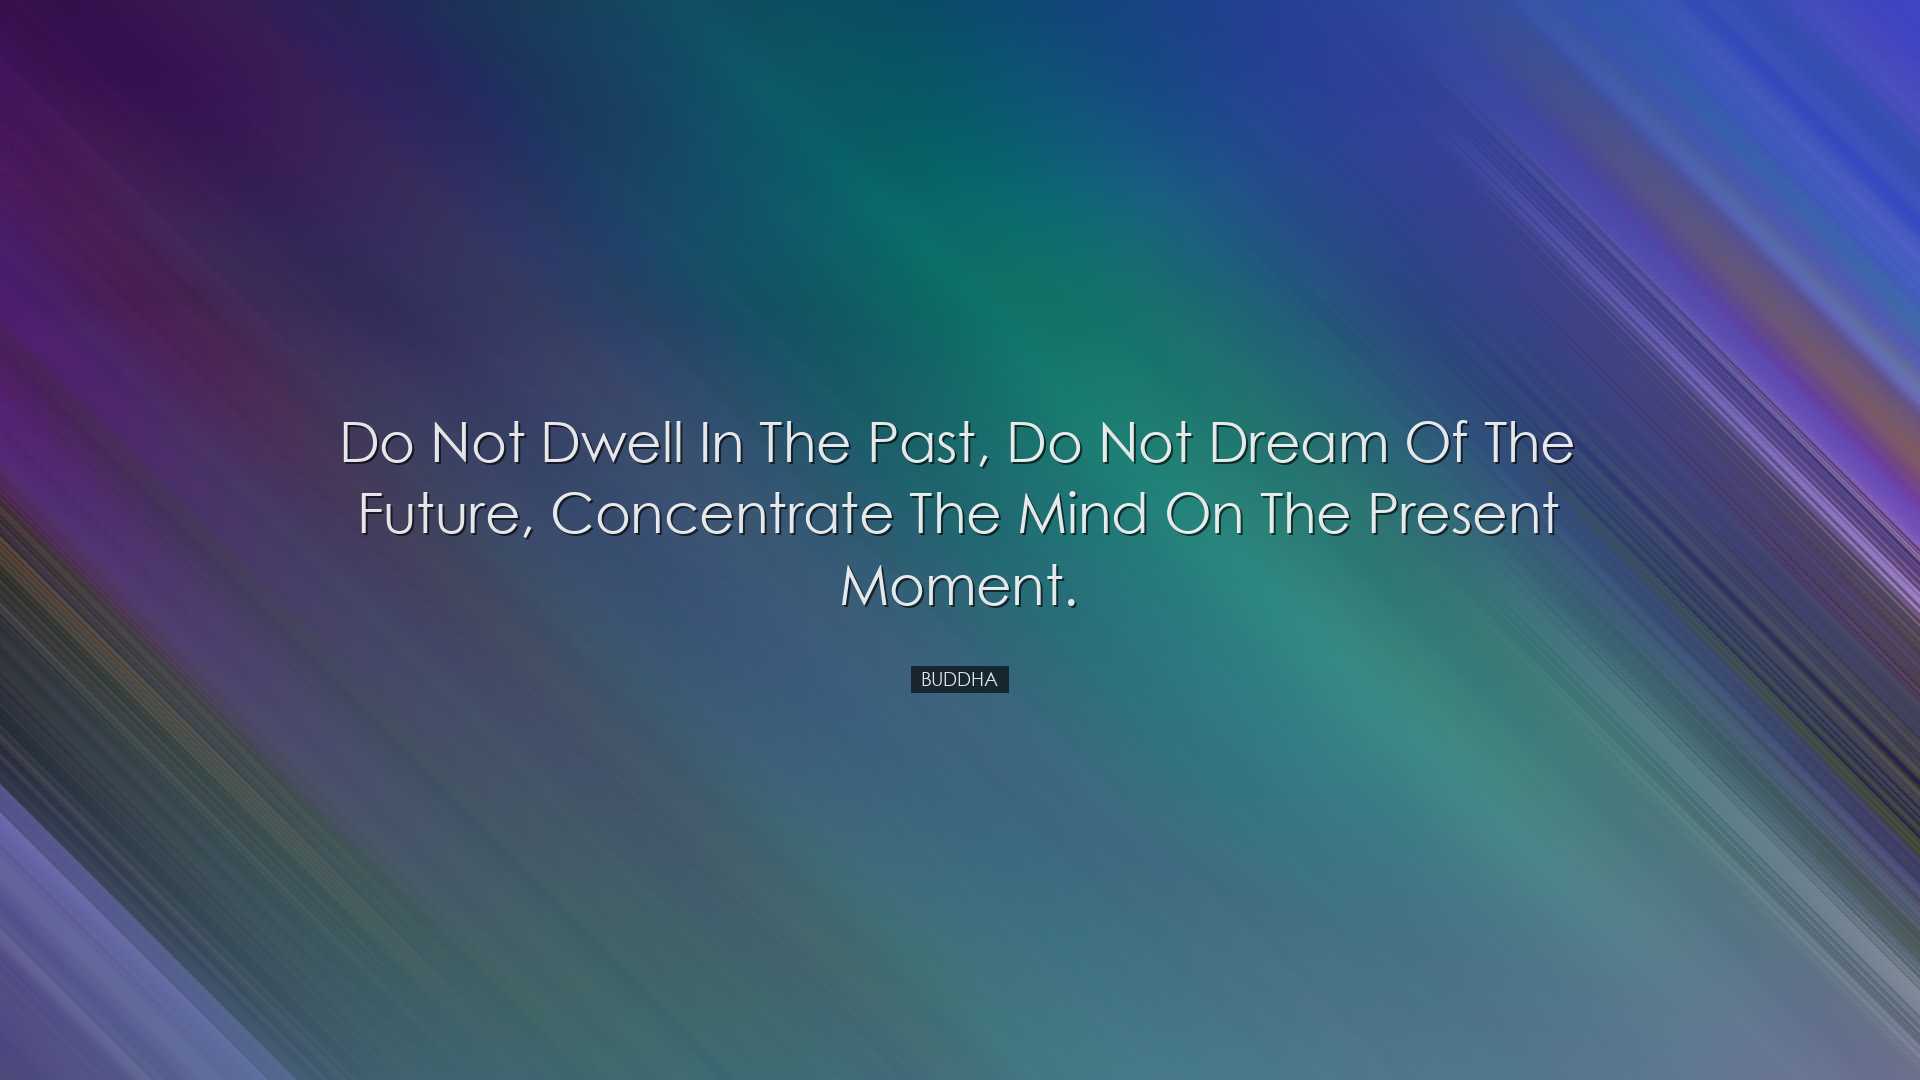 Do not dwell in the past, do not dream of the future, concentrate